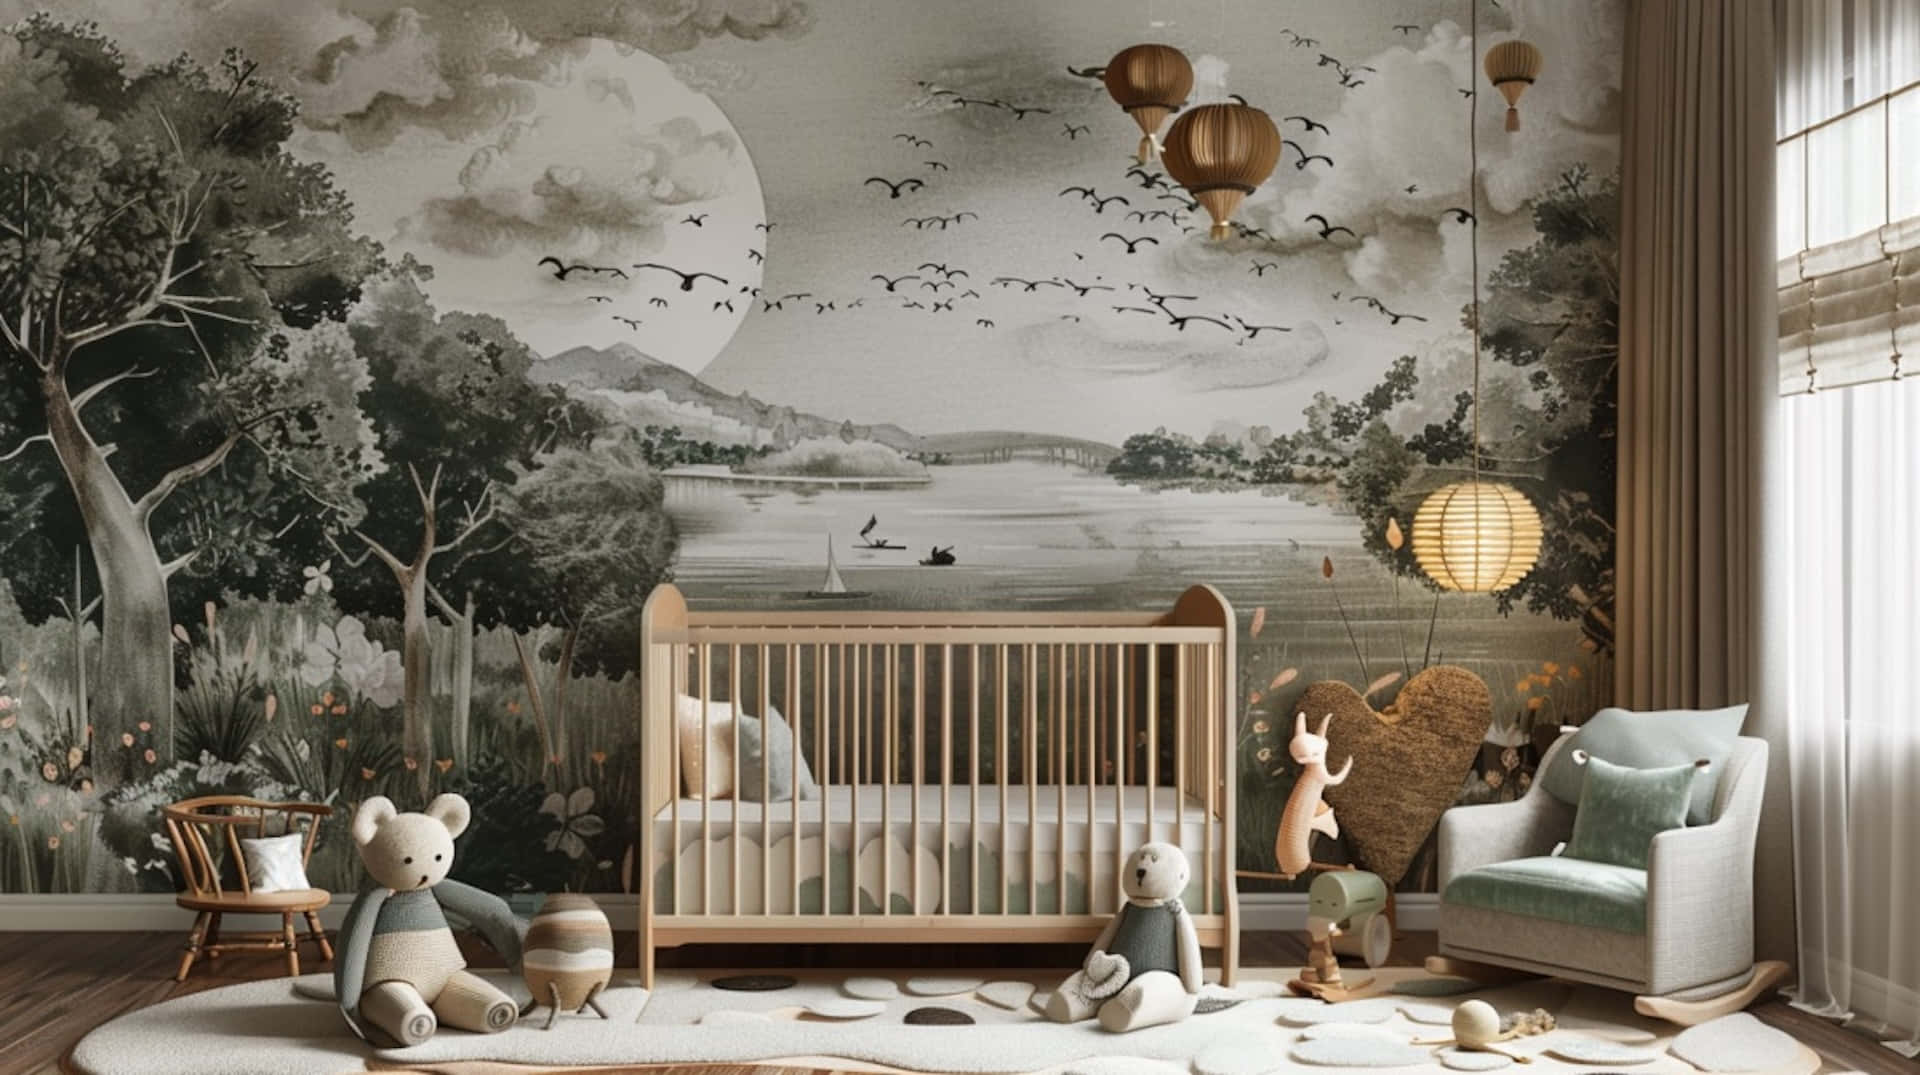 Enchanted Forest Nursery Theme Wallpaper